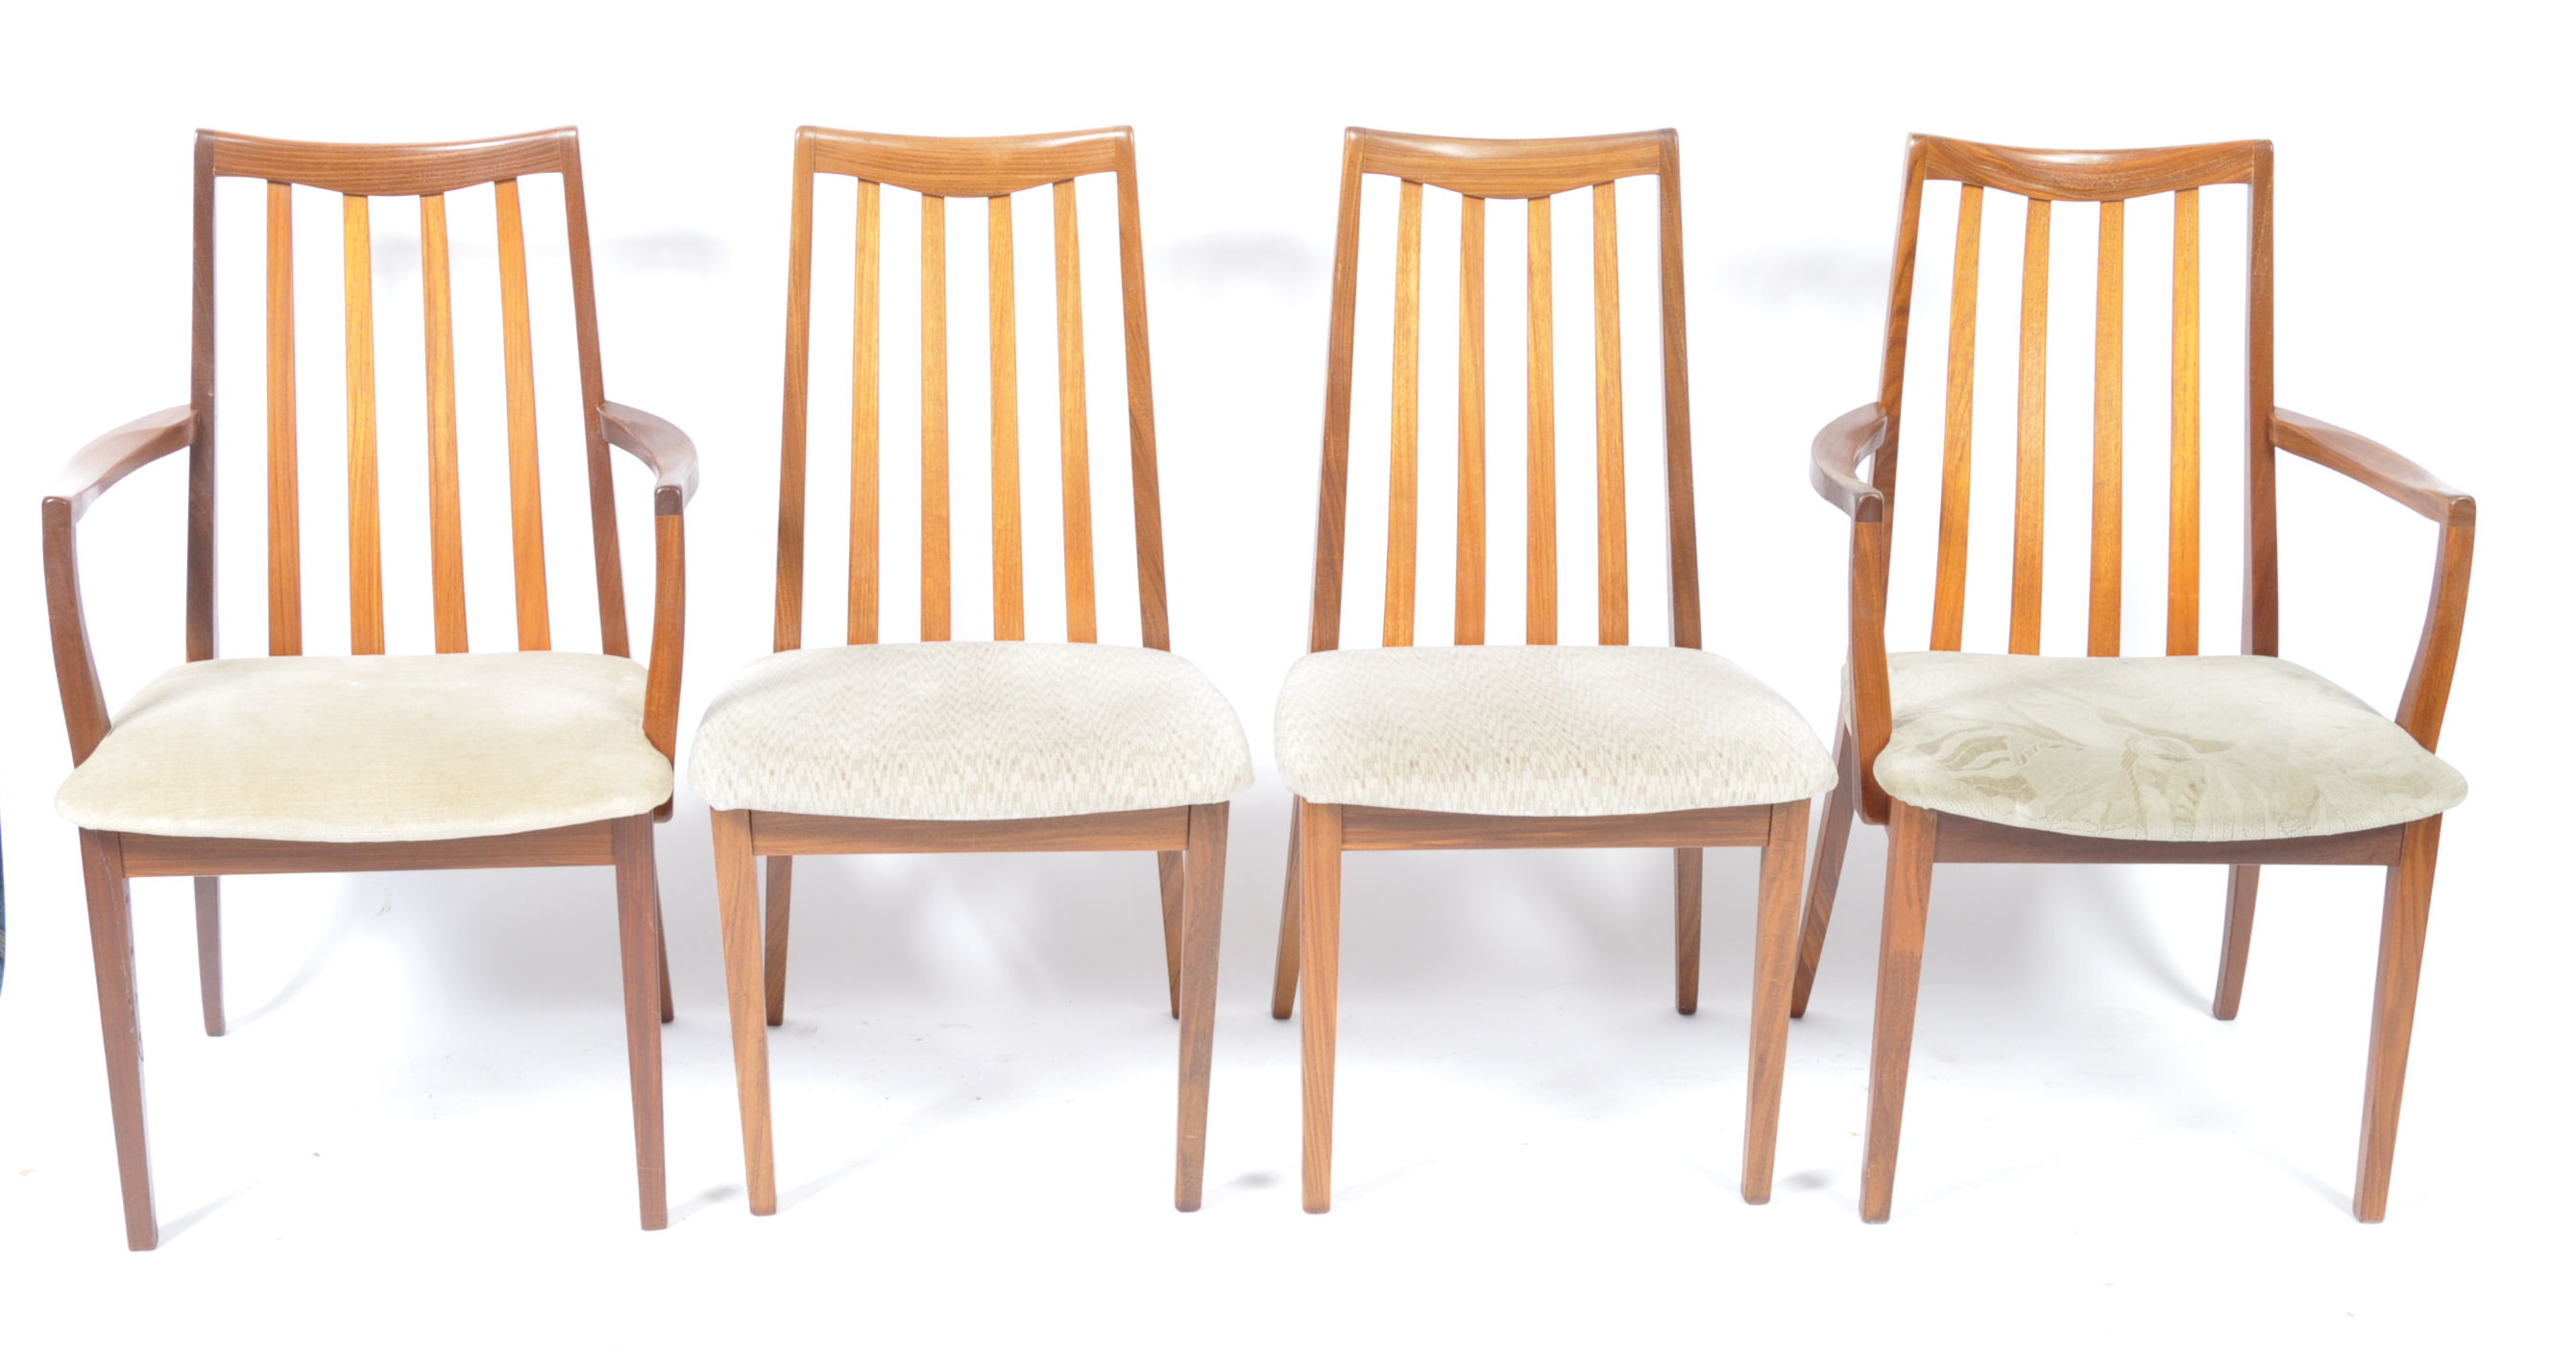 LESLIE DANDY FOR G-PLAN SET OF 4 TEAK WOOD DINING CHAIRS - Image 2 of 5